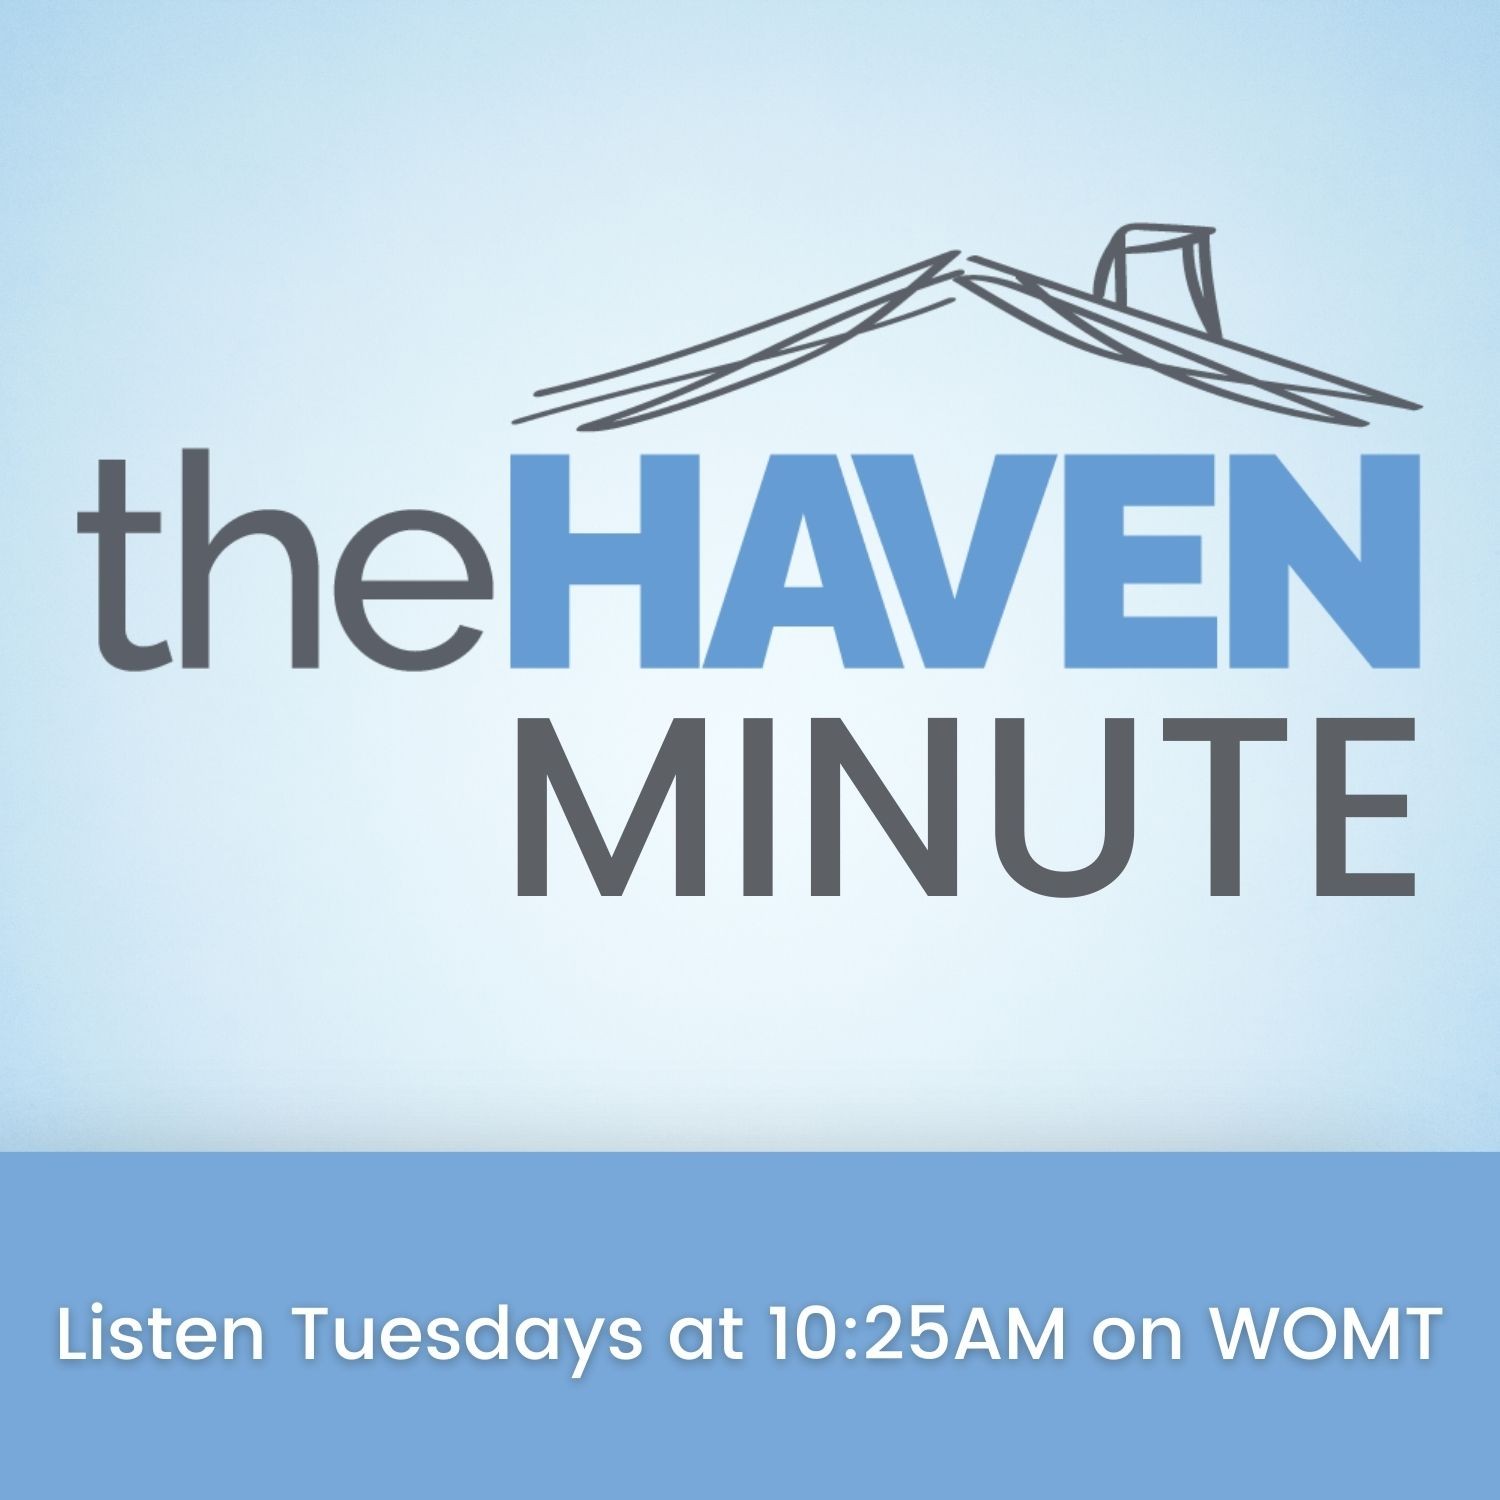 The Haven Minute